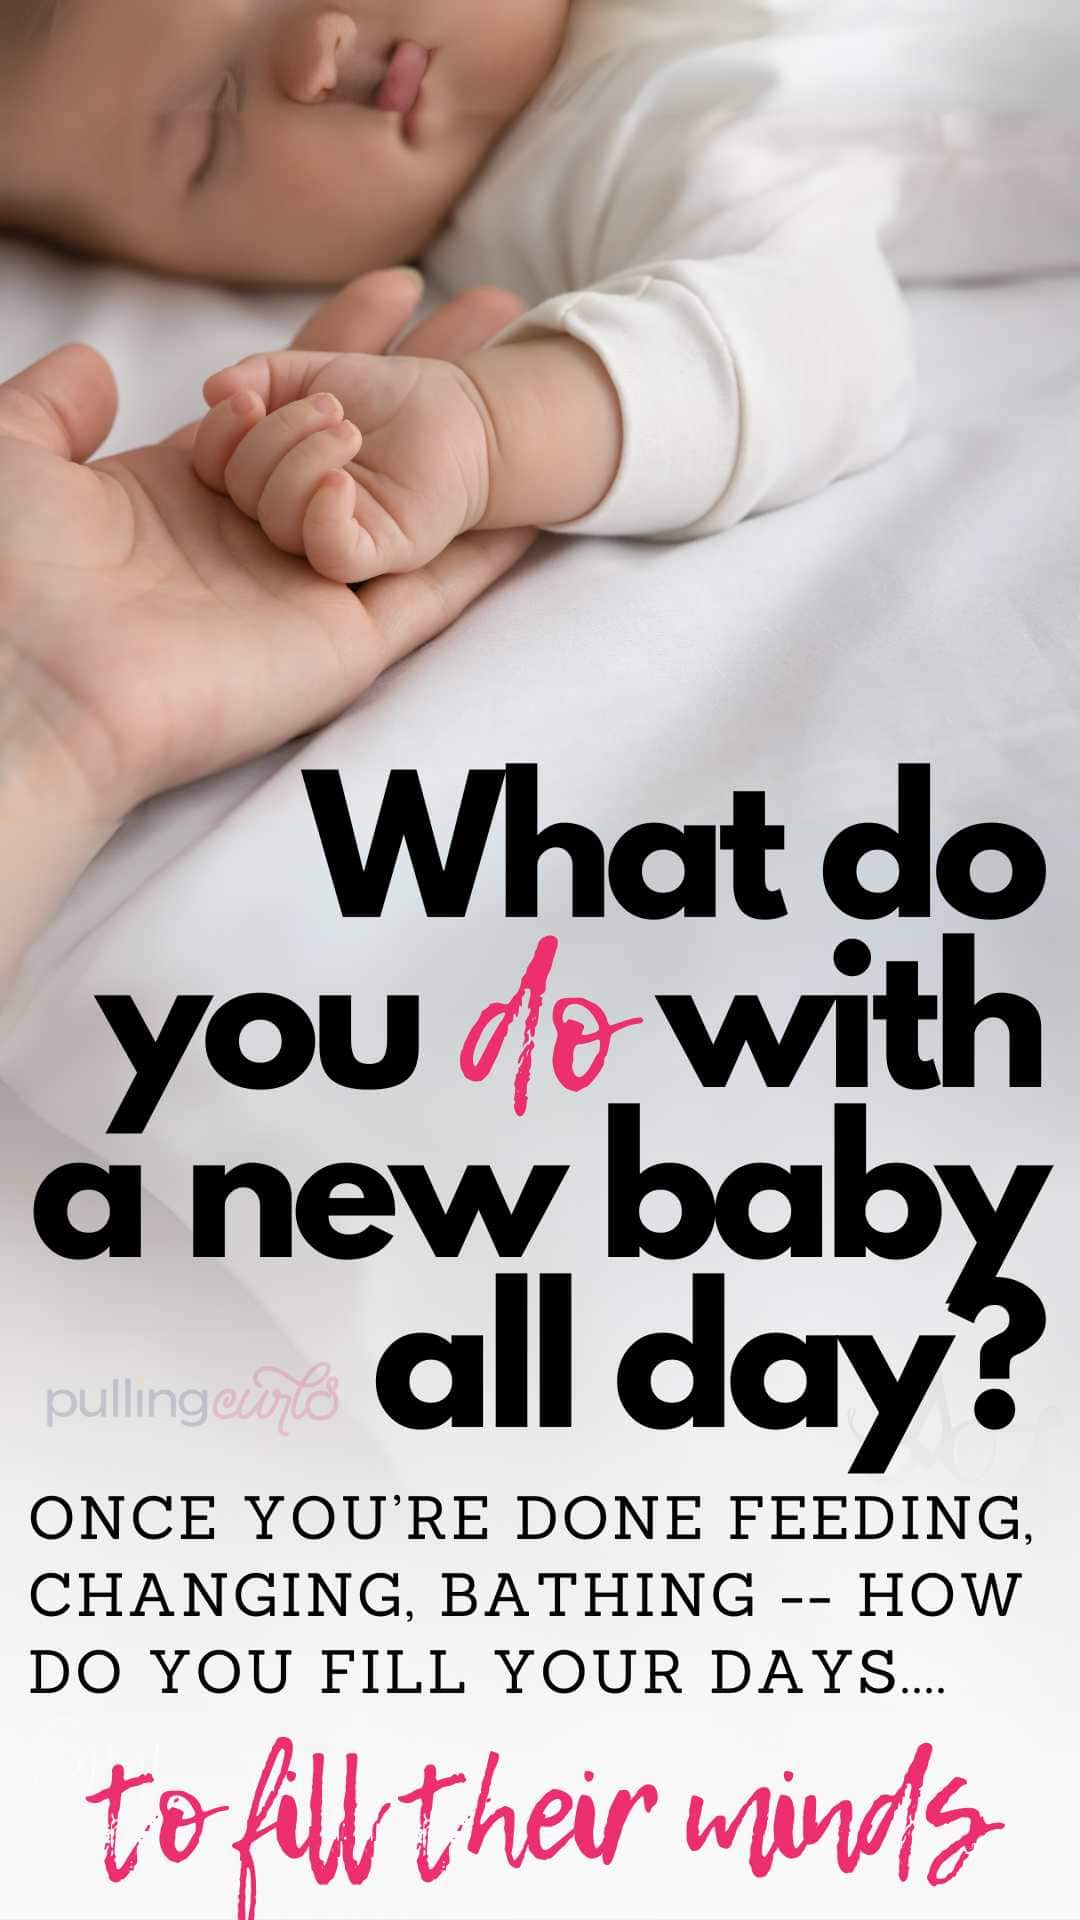 mom holding newborn's hand // what do you DO with a new baby all day / Once you’re done feeding, changing, bathing -- how do you fill your days.... to fill their minds. via @pullingcurls